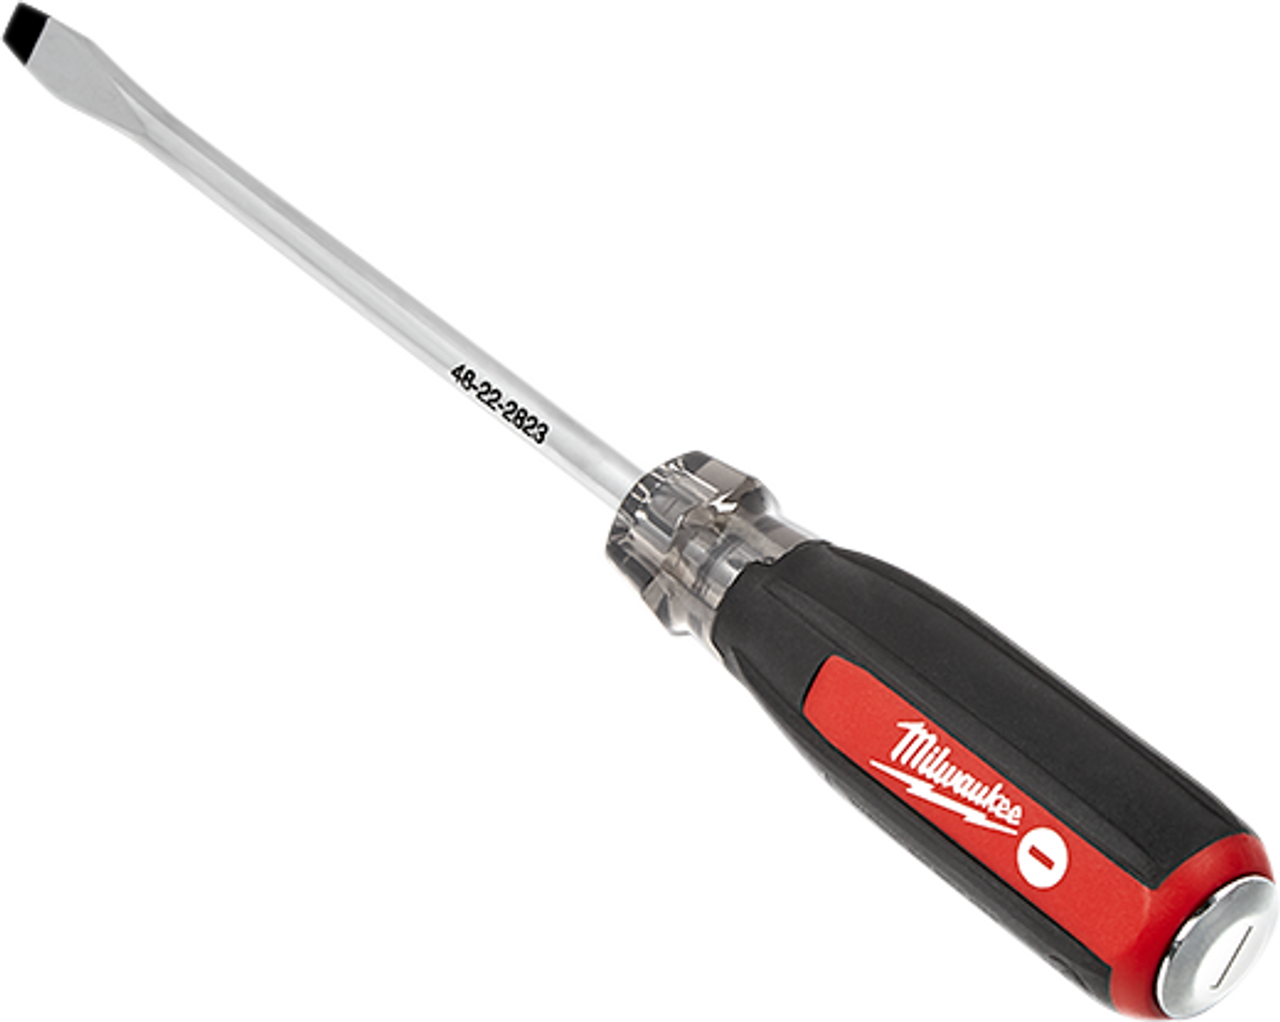 Milwaukee 5/16 In. x 6 In. Cushion Grip Demo Slotted Screwdriver